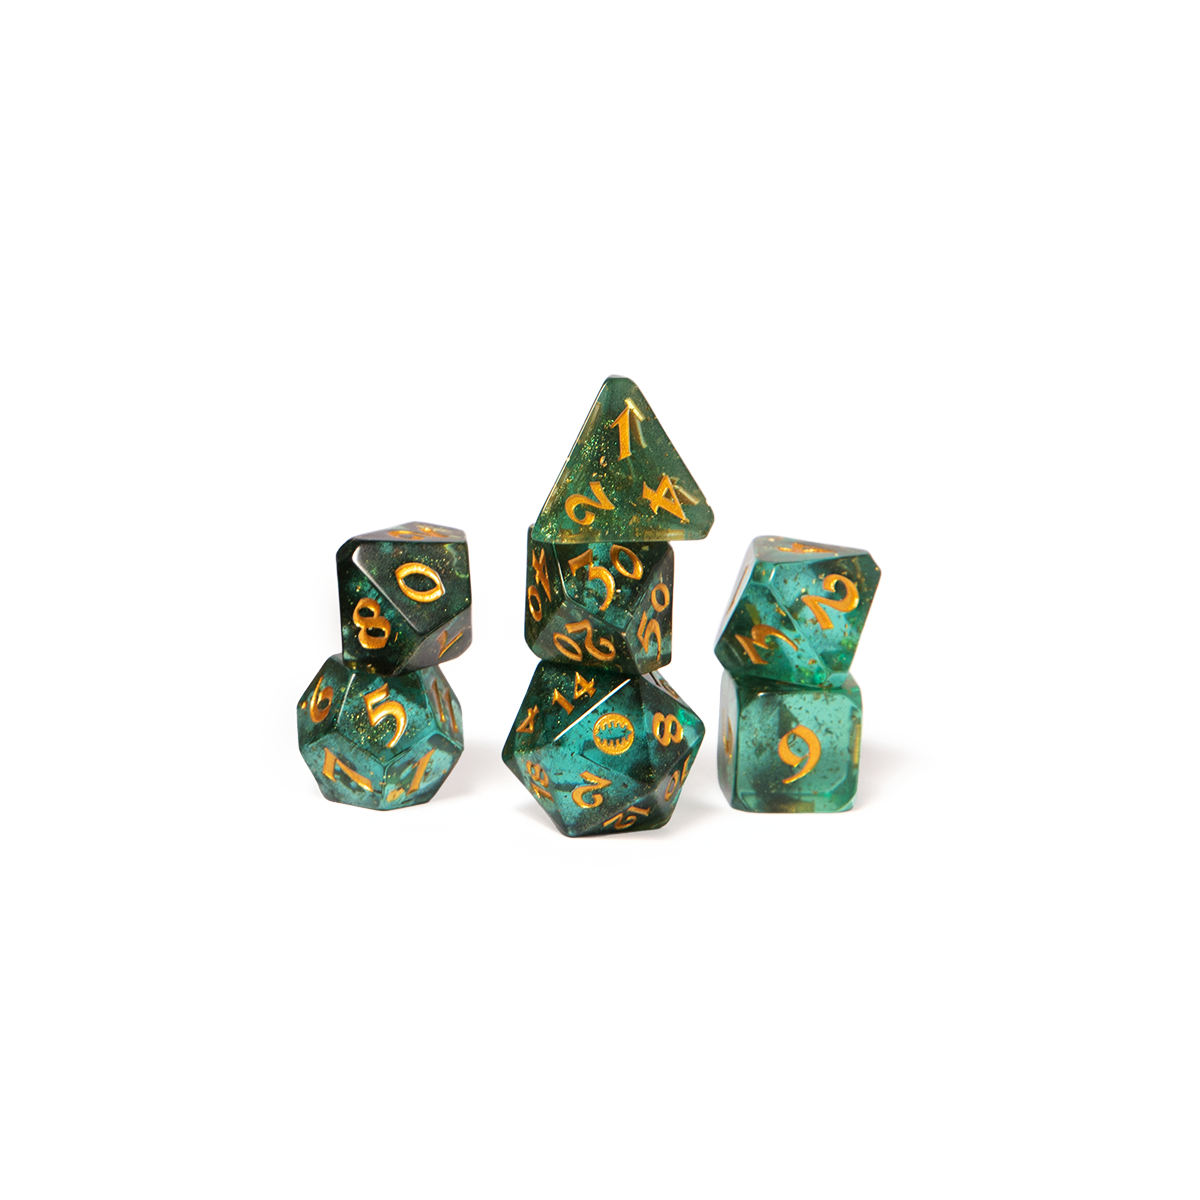 MIGHTY NEIN DICE SET: BEAUREGARD LIONETT based on the character in Critical Role's campaign 2,Mighty Nein played by Marisha Ray